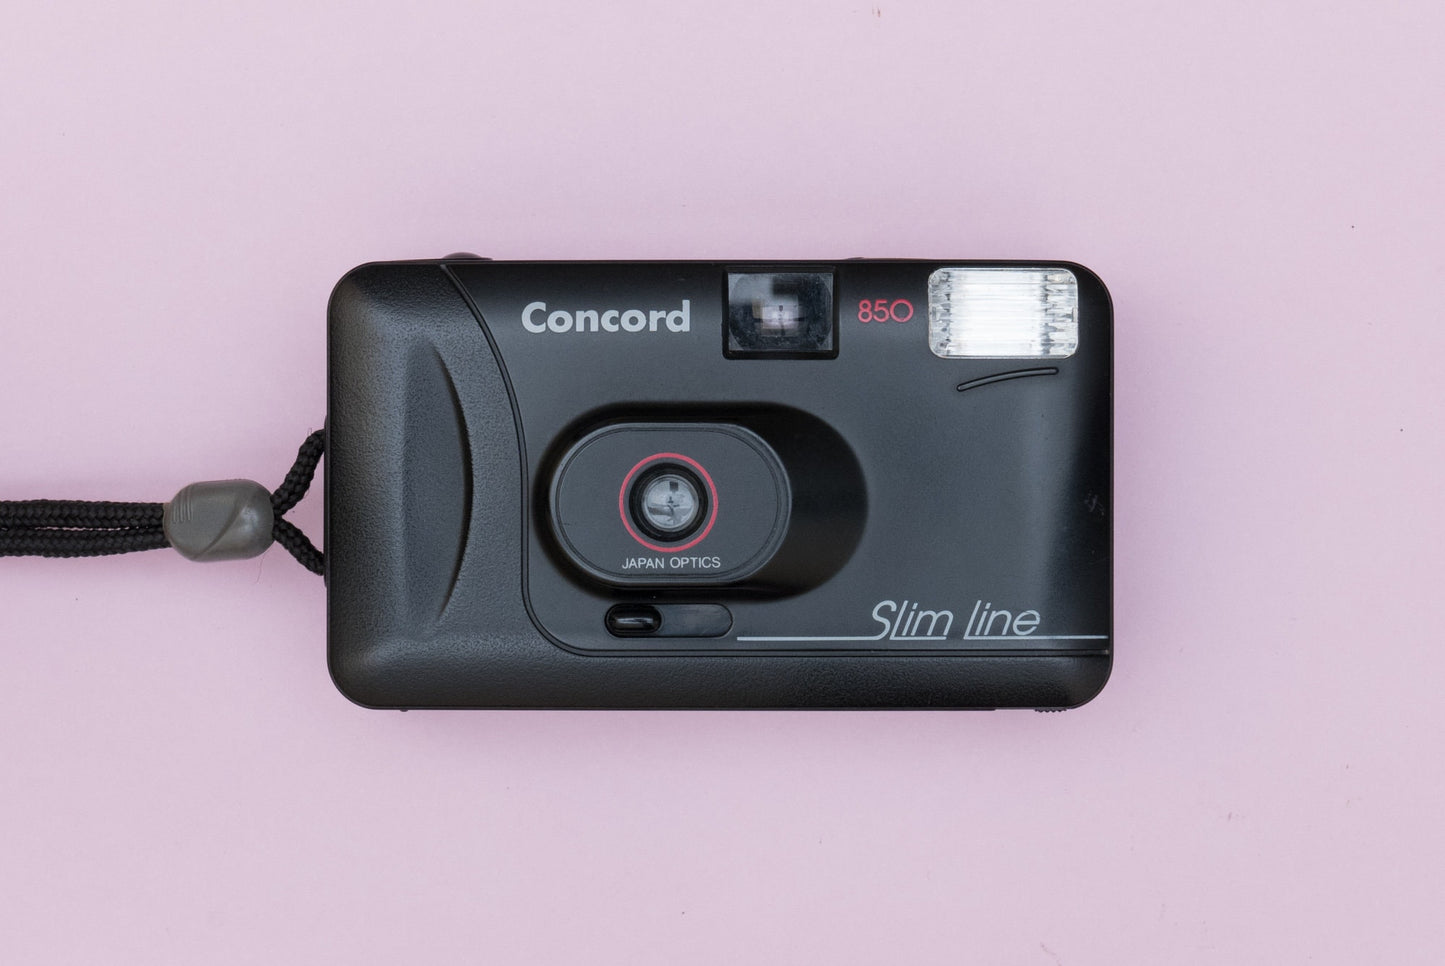 Concord 850 Slim Line Compact Point and Shoot 35mm Film Camera